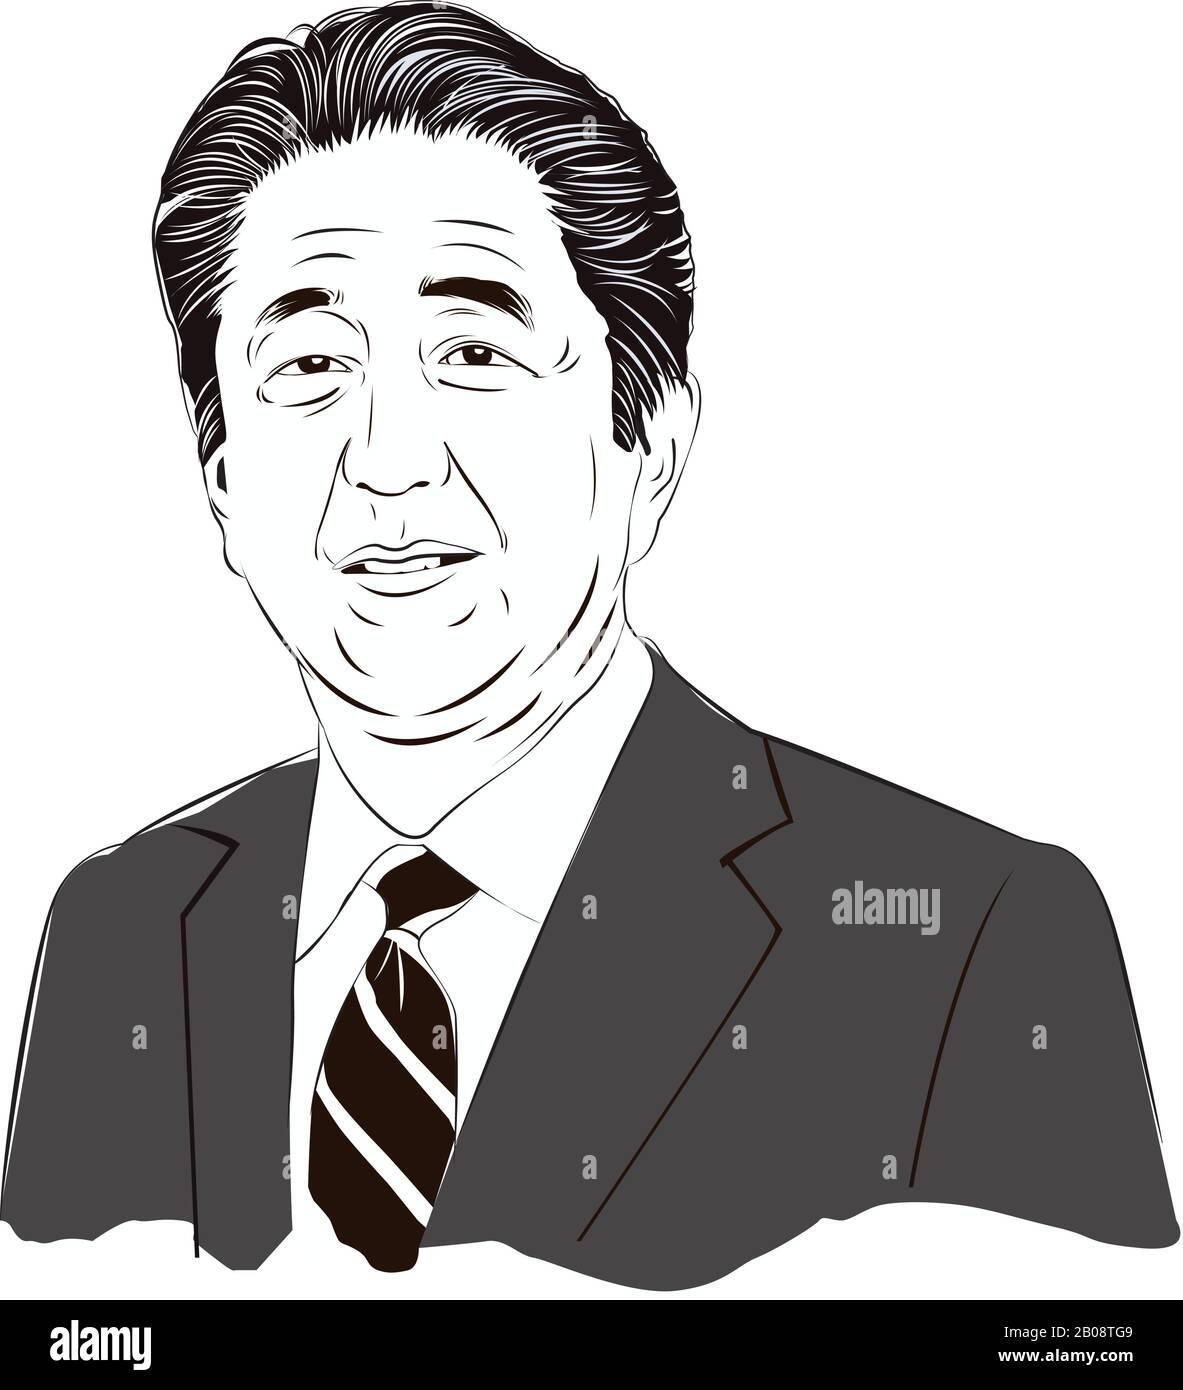 Shinzo Abe  Prime Minister of Japan, Abe is also currently the president of the conservative Liberal Democratic Party, line art of shinzo abe, Stock Vector